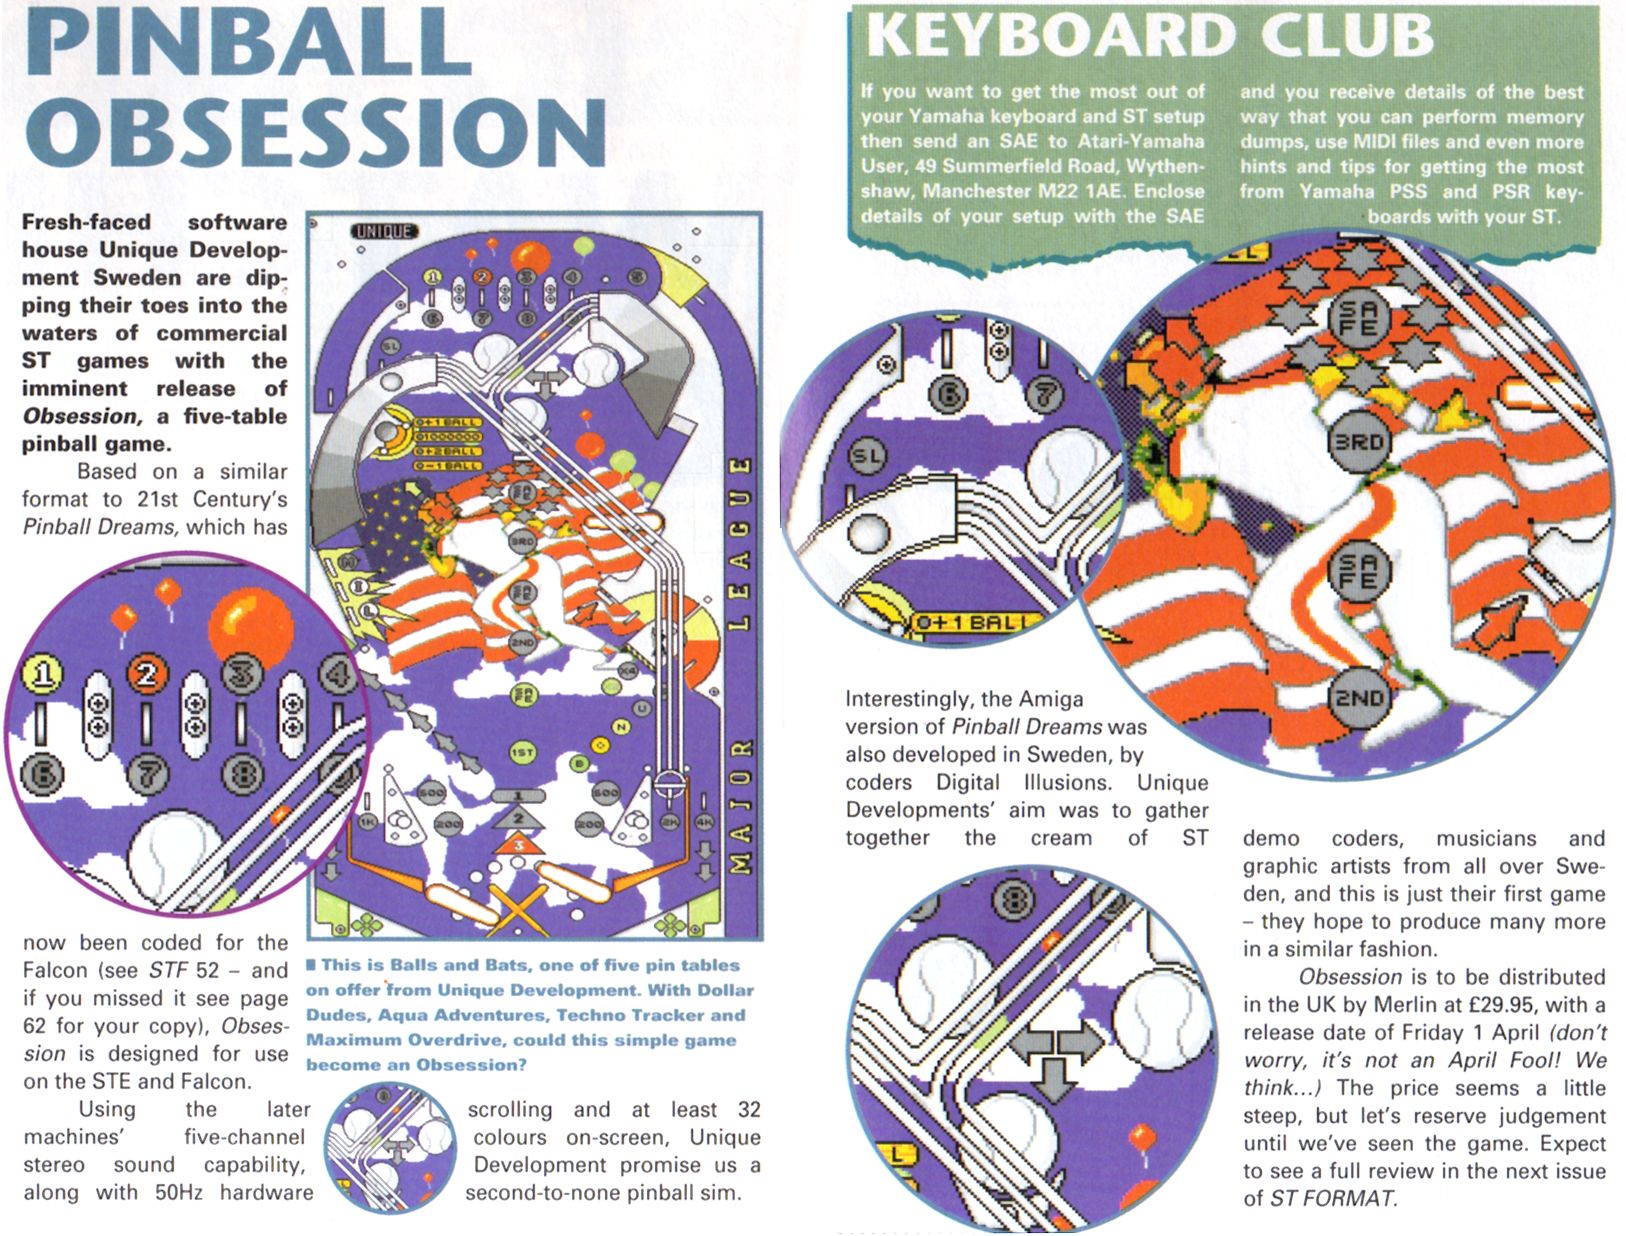 This is an early version of Obsession. The original idea was to make a simple shareware pinball game for the STE, on the level of 'Smash Hit Tennis'